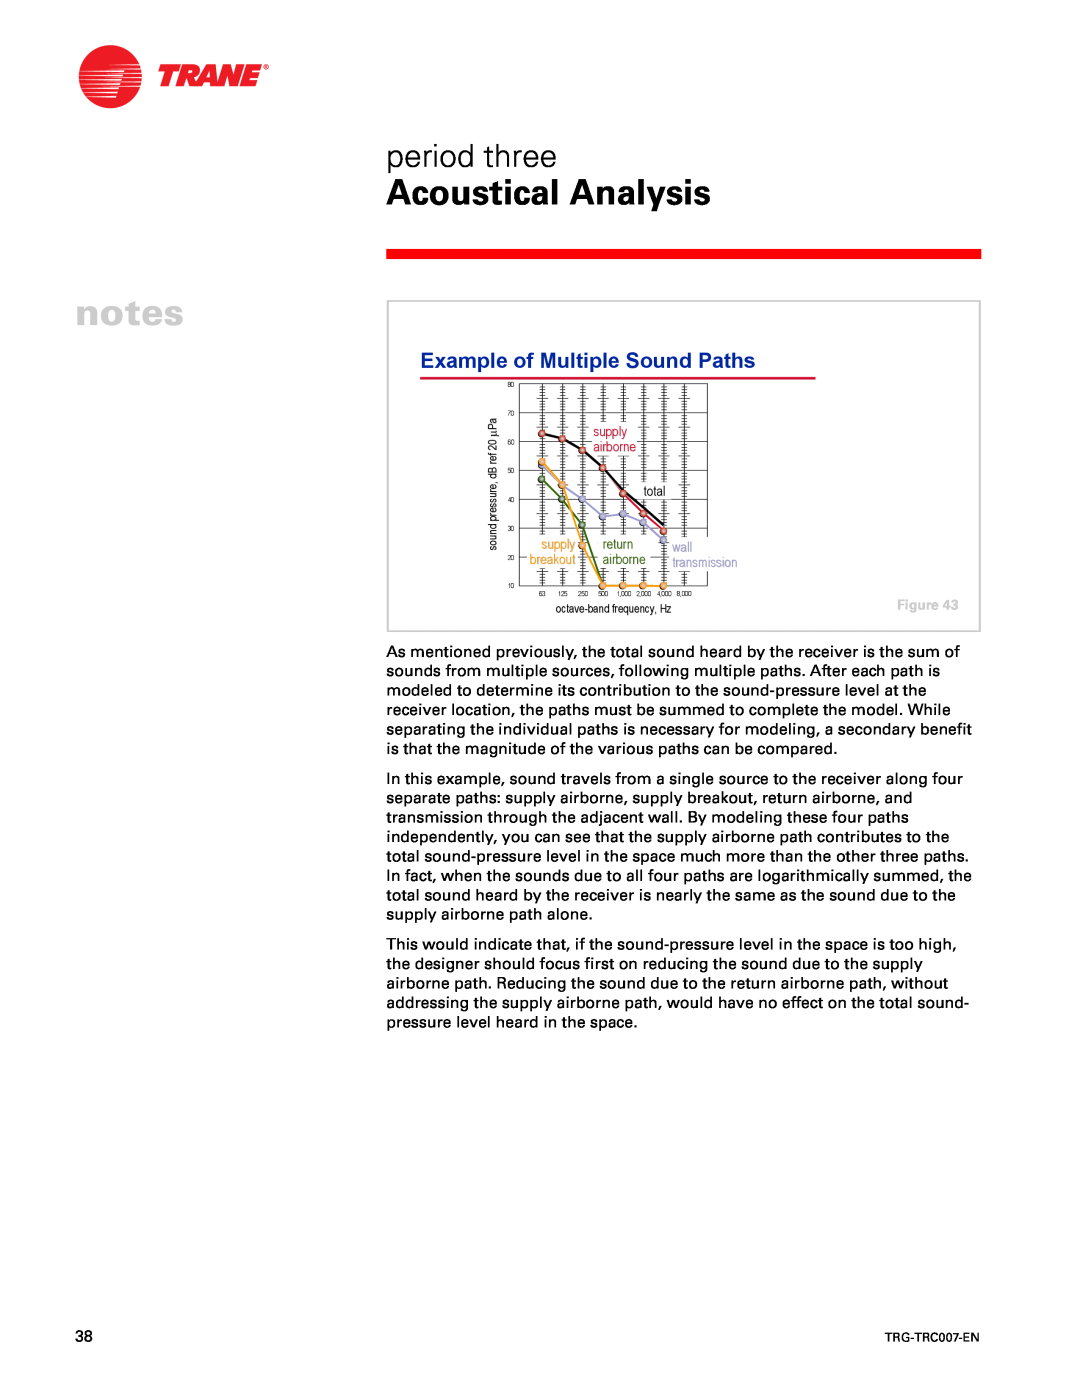 Trane TRG-TRC007-EN manual Acoustical Analysis, period three, Example of Multiple Sound Paths, supply, airborne, total 